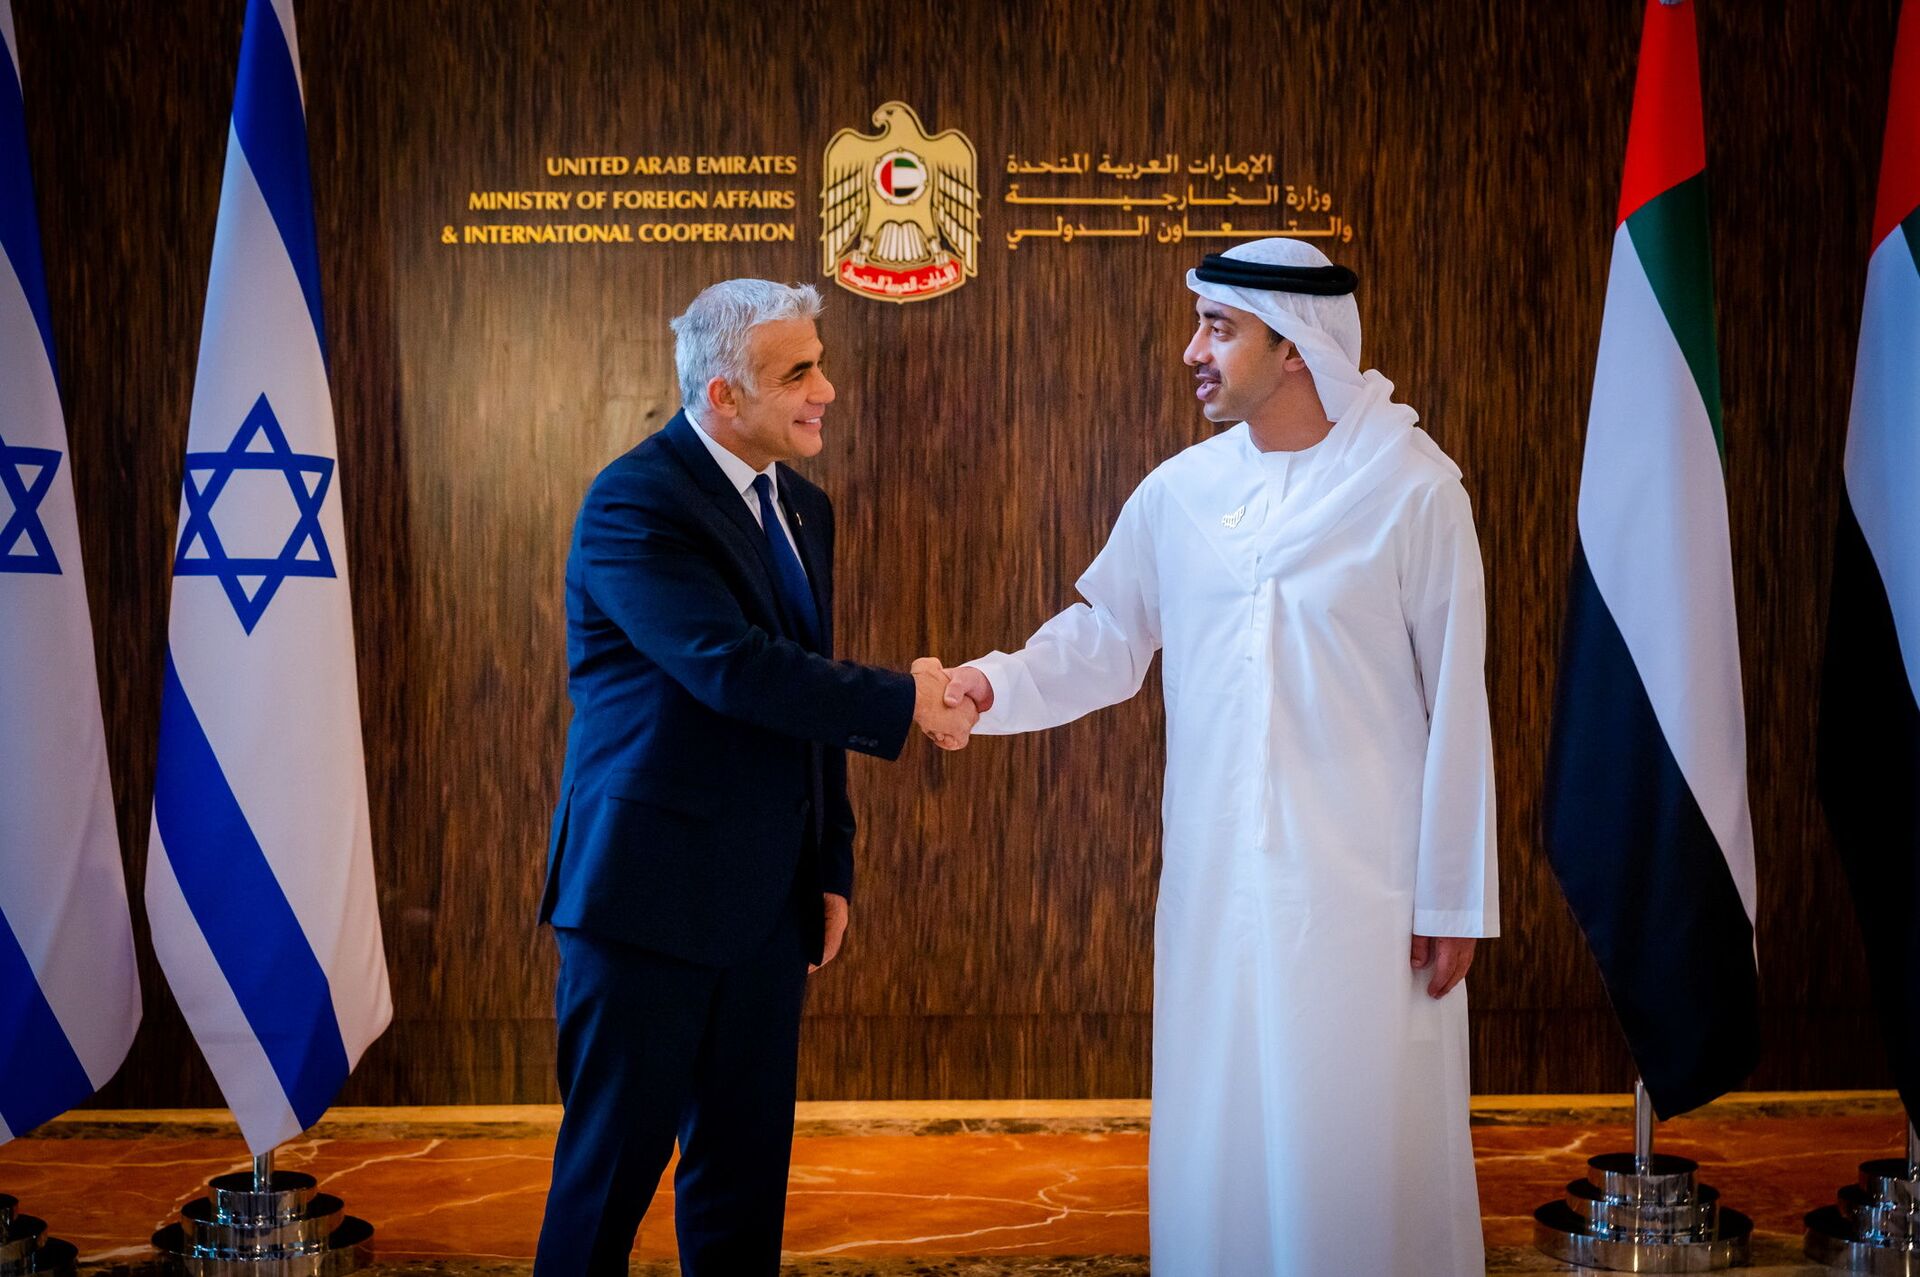 Israel's Foreign Minister Yair Lapid shakes hands with United Arab Emirates' Foreign Minister Sheikh Abdullah bin Zayed al-Nahyan in Abu Dhabi, UAE June 29, 2021. - Sputnik International, 1920, 12.12.2021